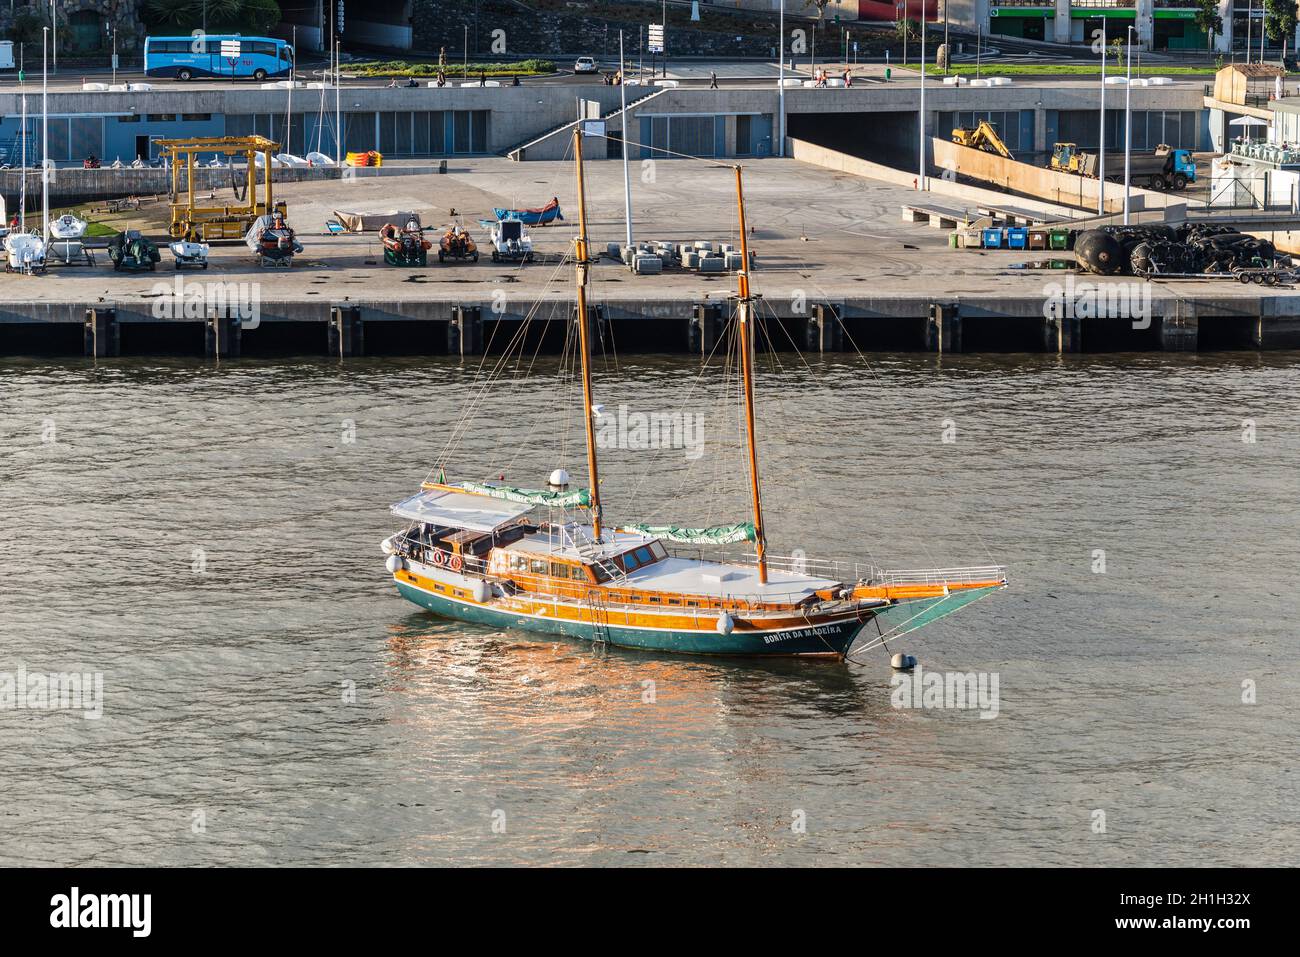 Funchal, Portugal - December 10, 2016: Bonita da Madeira motor driven sailing boat for dolphin and whale trip anchored in the bay of Funchal, Madeira Stock Photo